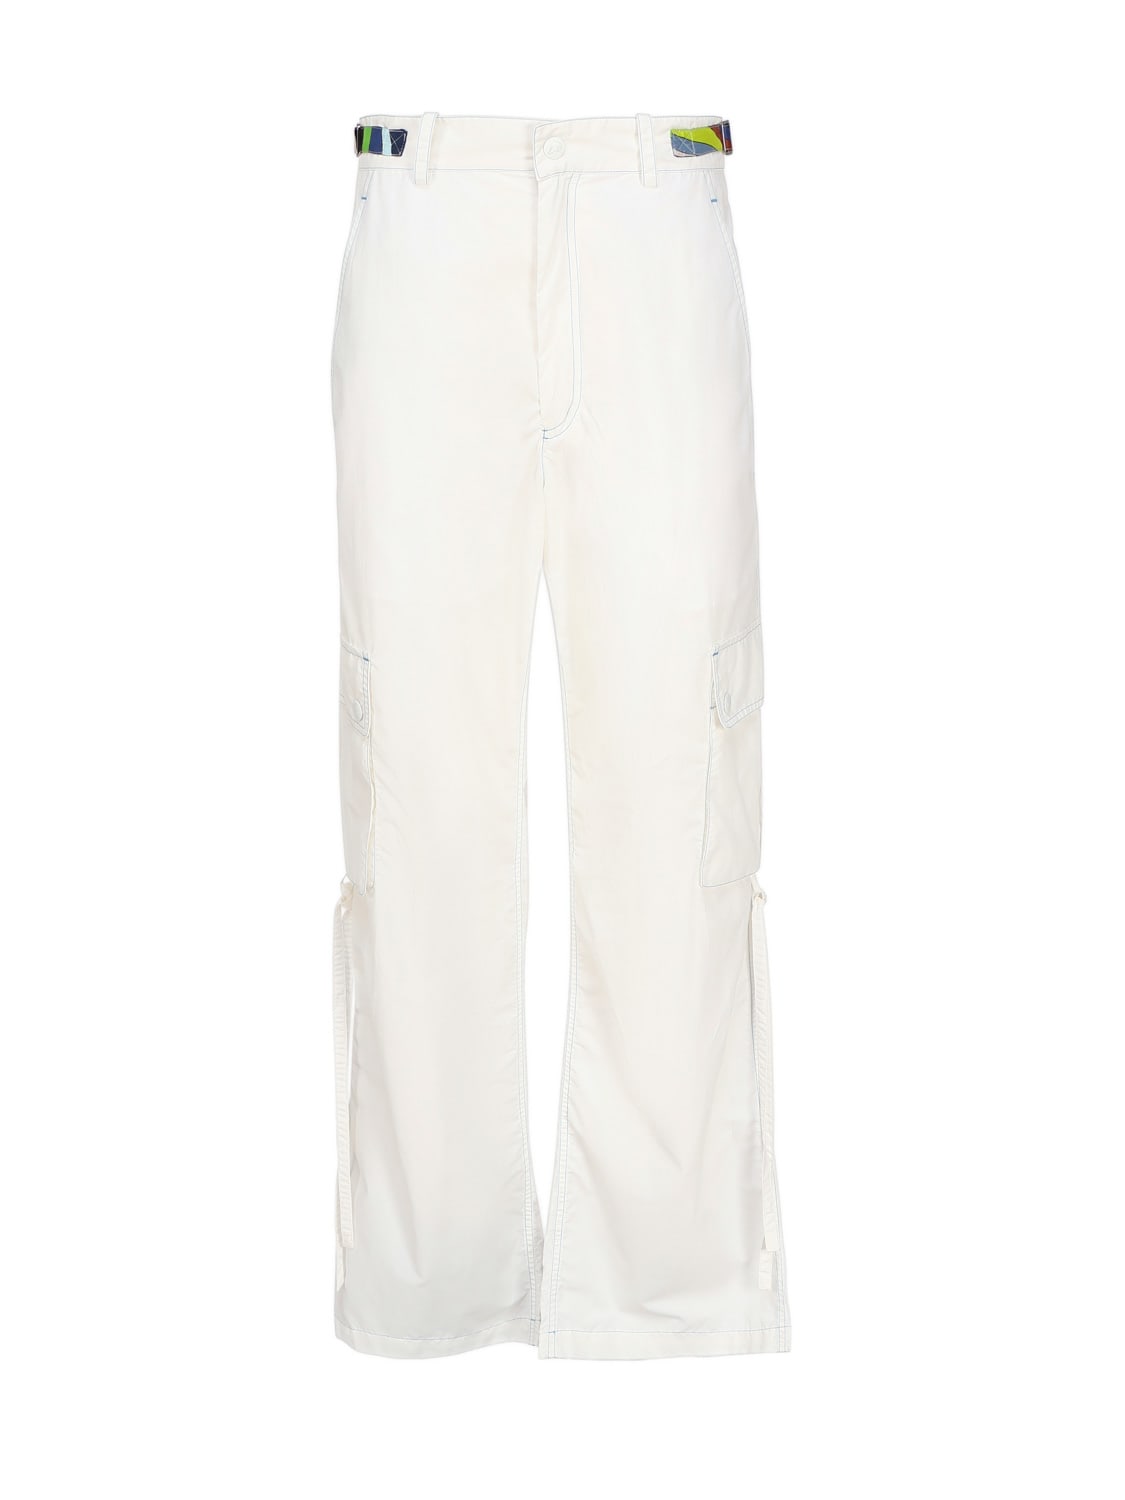 Pucci Iride Cargo Trousers